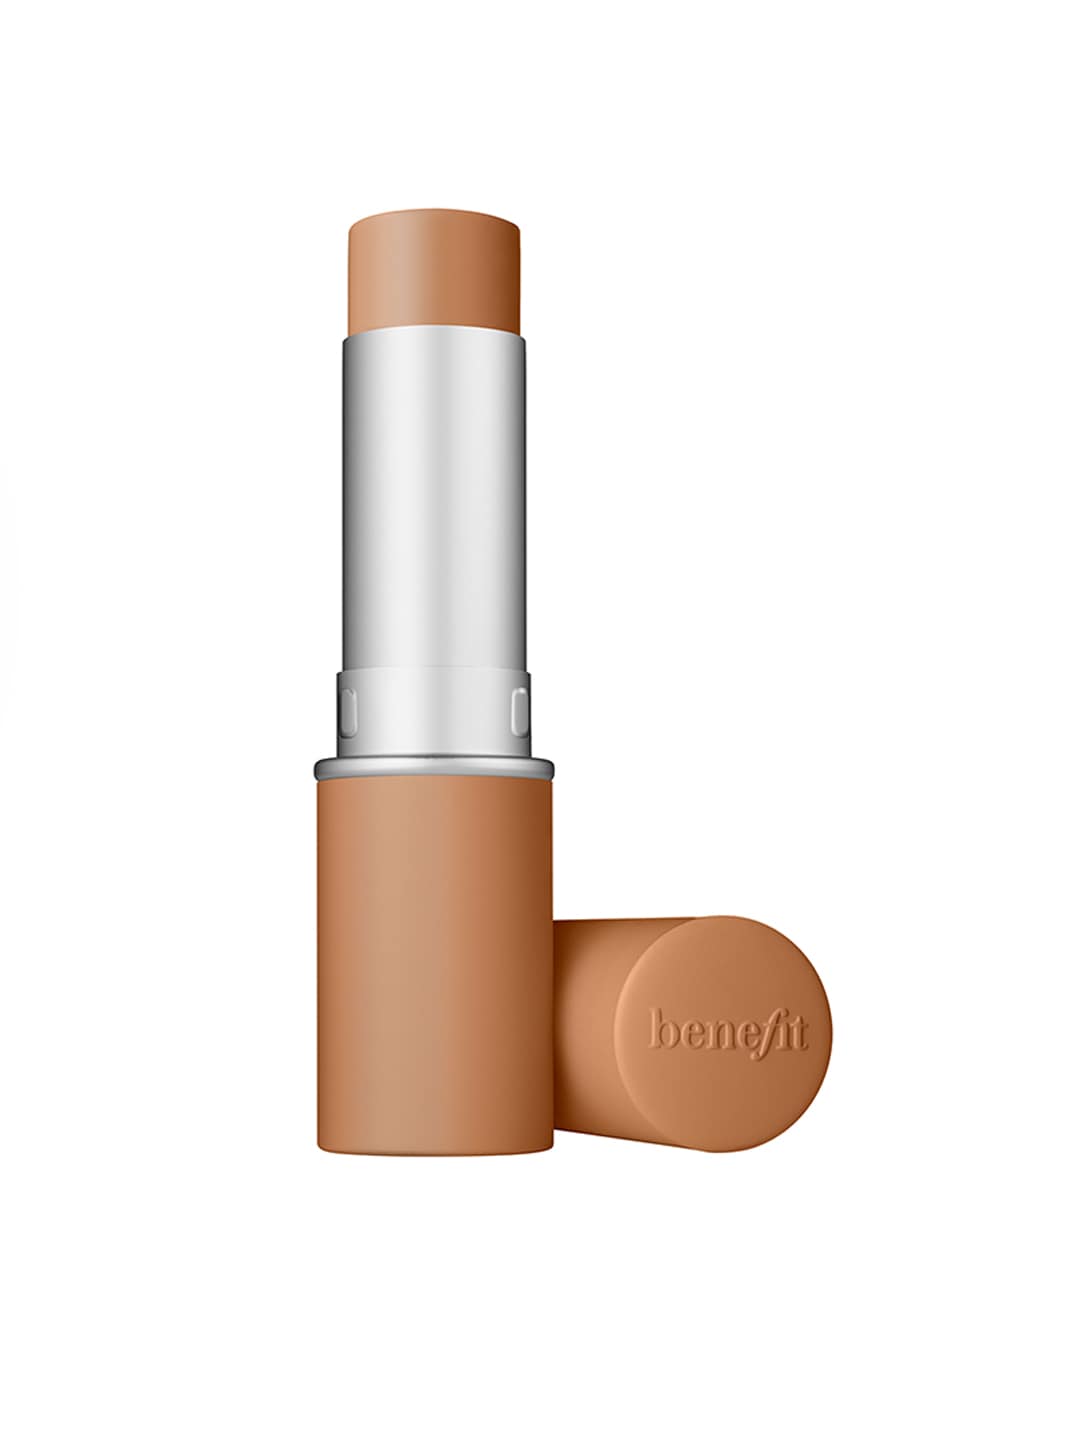 Benefits Cosmetics Hello Happy Air Stick Foundation - 09 Deep Neutral Warm, 8.5 g Price in India